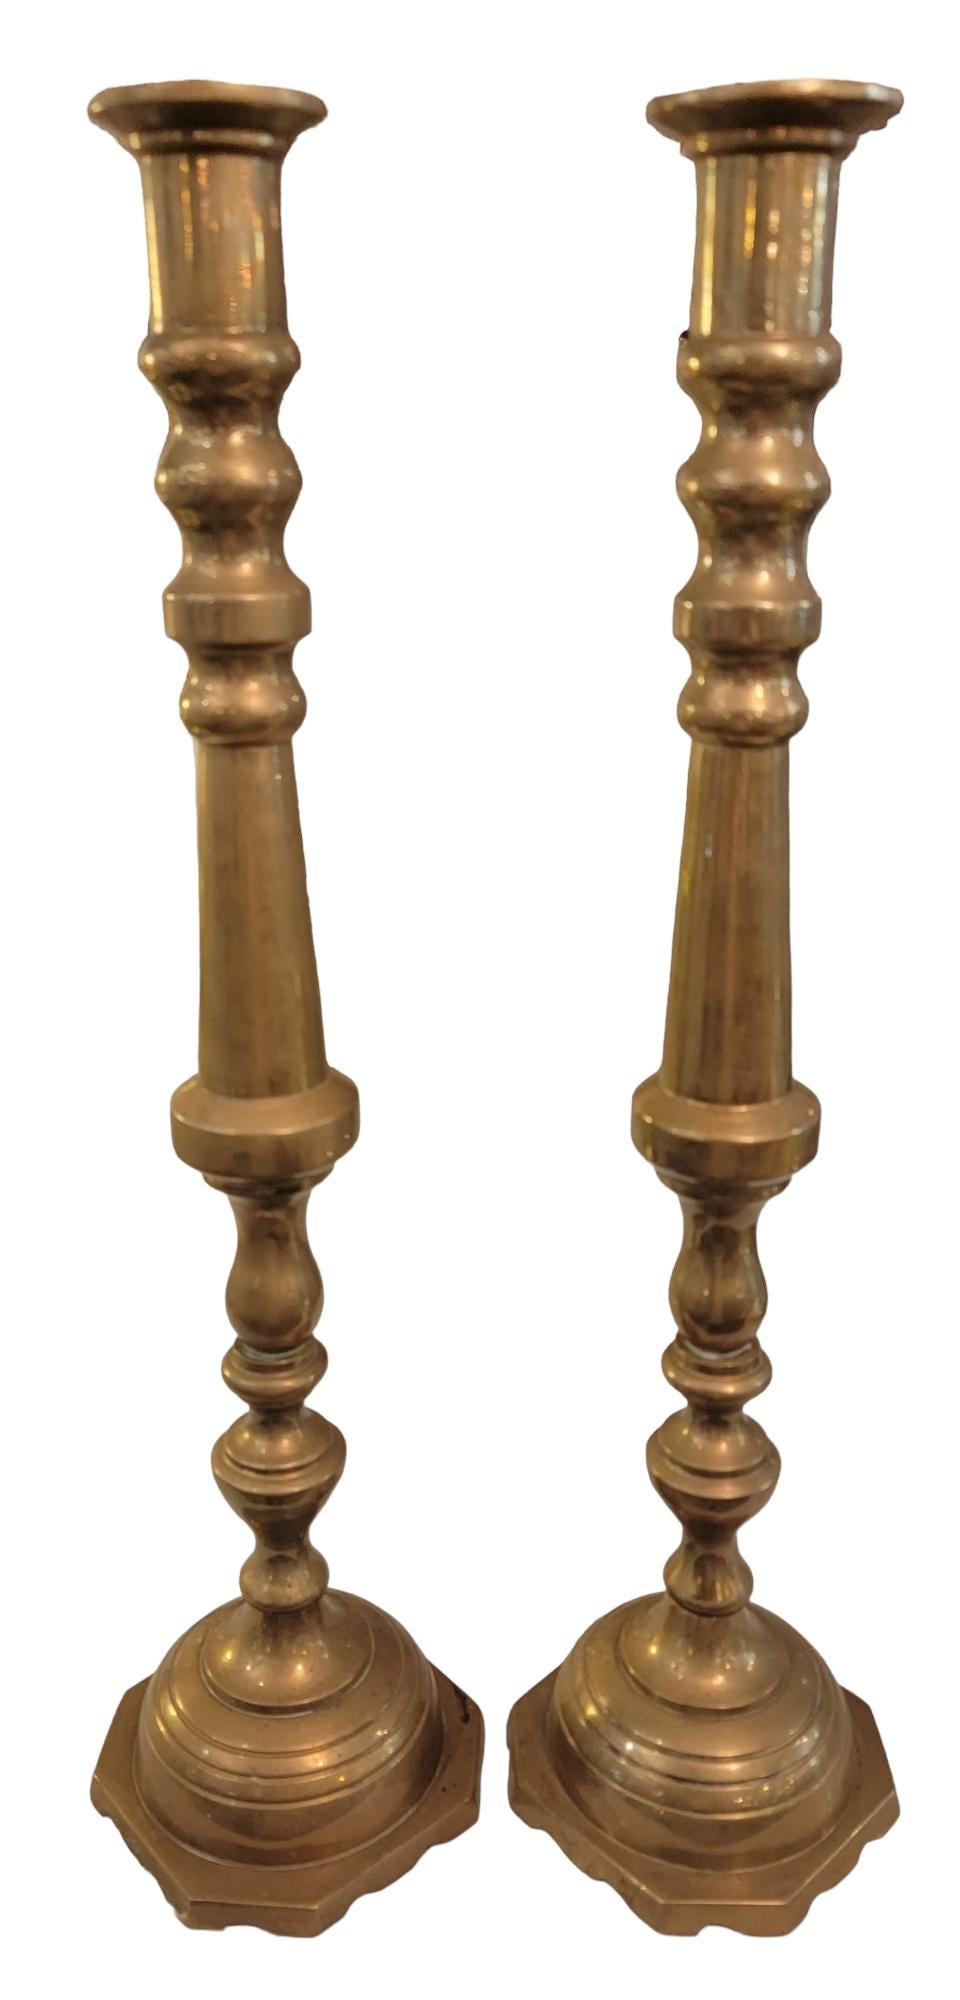 19th century solid brass large English candlesticks. The great weight and the wide base offer incredible stability and strength to the candlesticks.